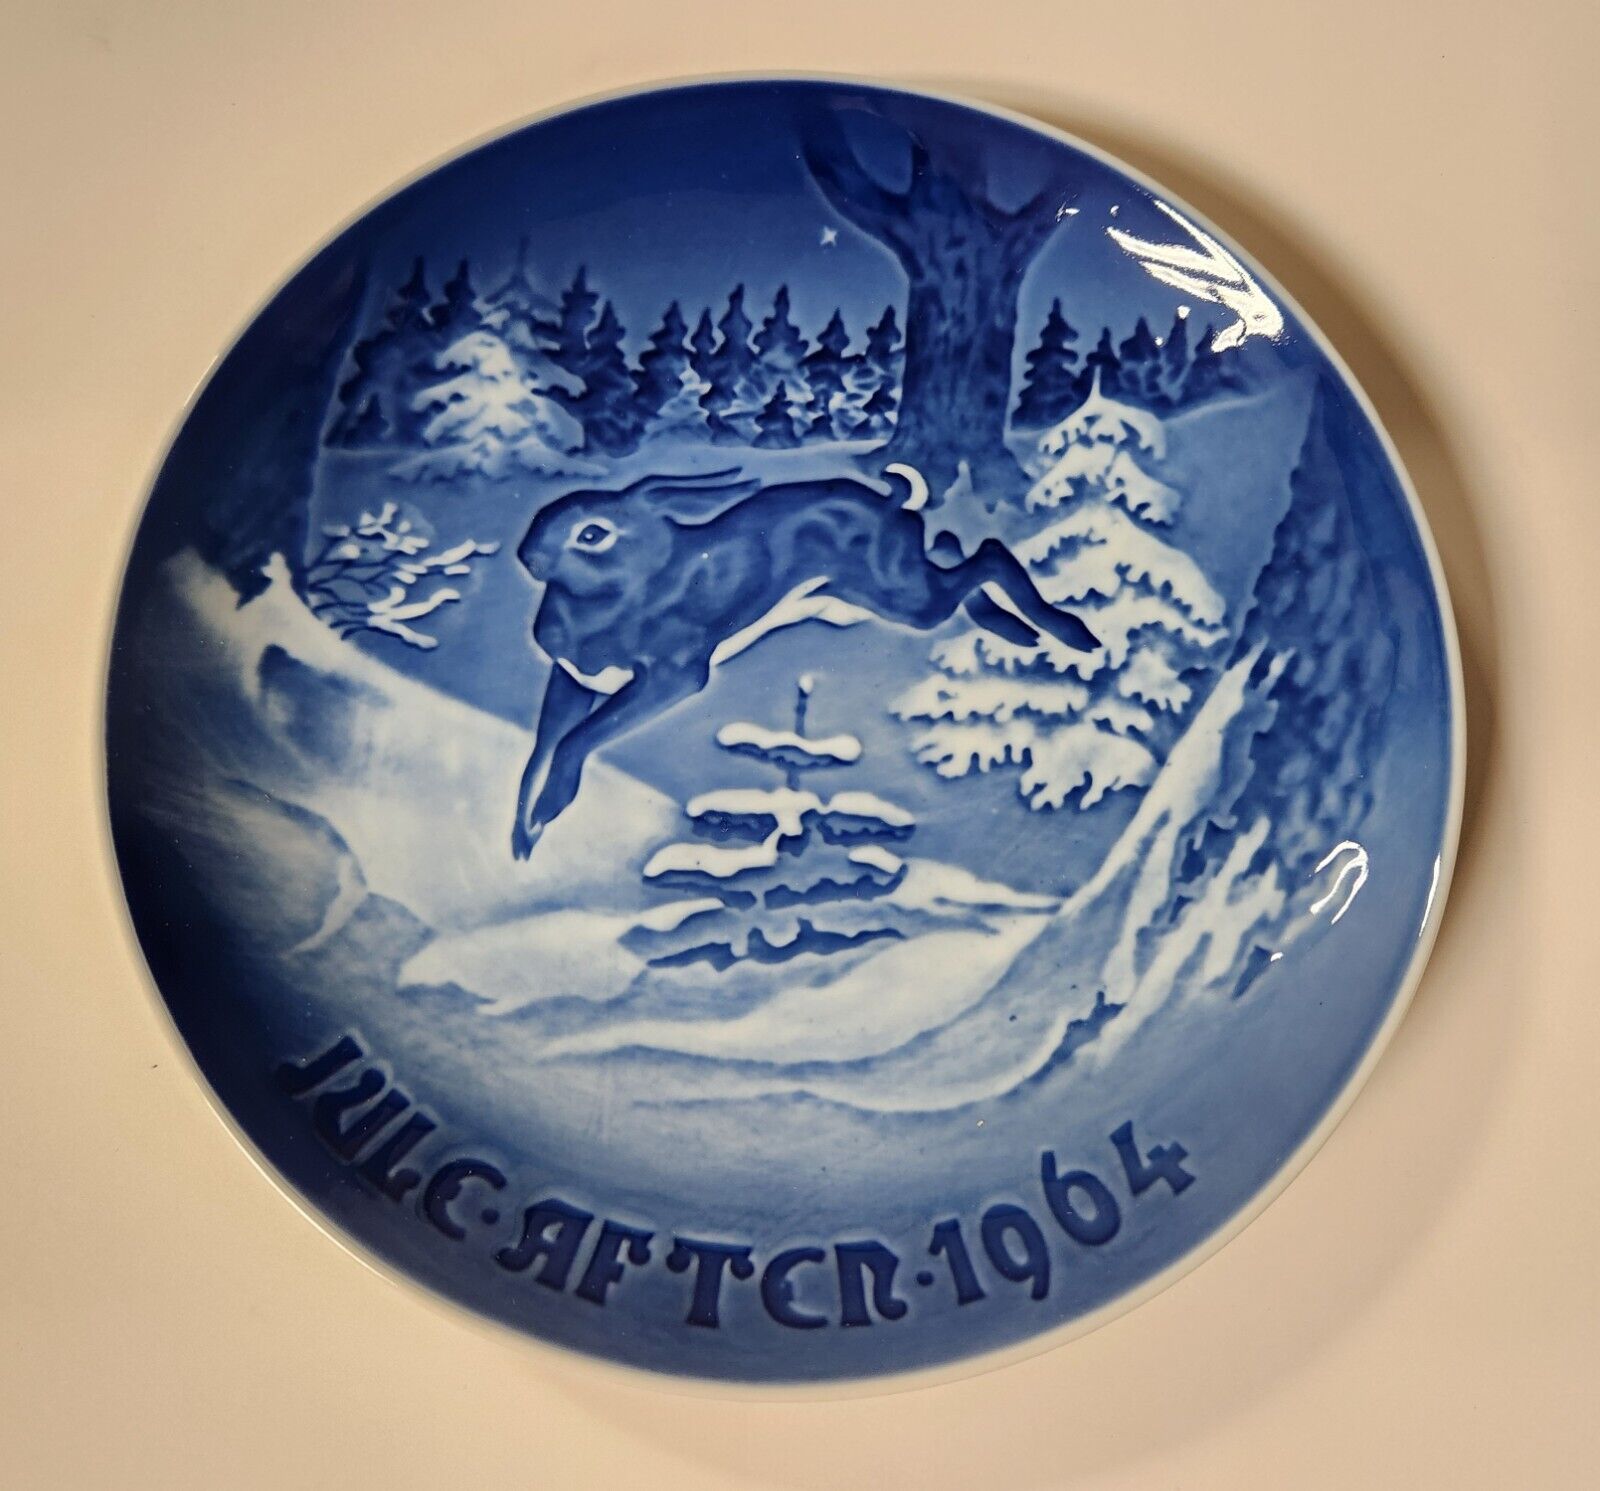 1964 Bing and Grondahl Collector’s Christmas Plate – The Fir Tree & Hare